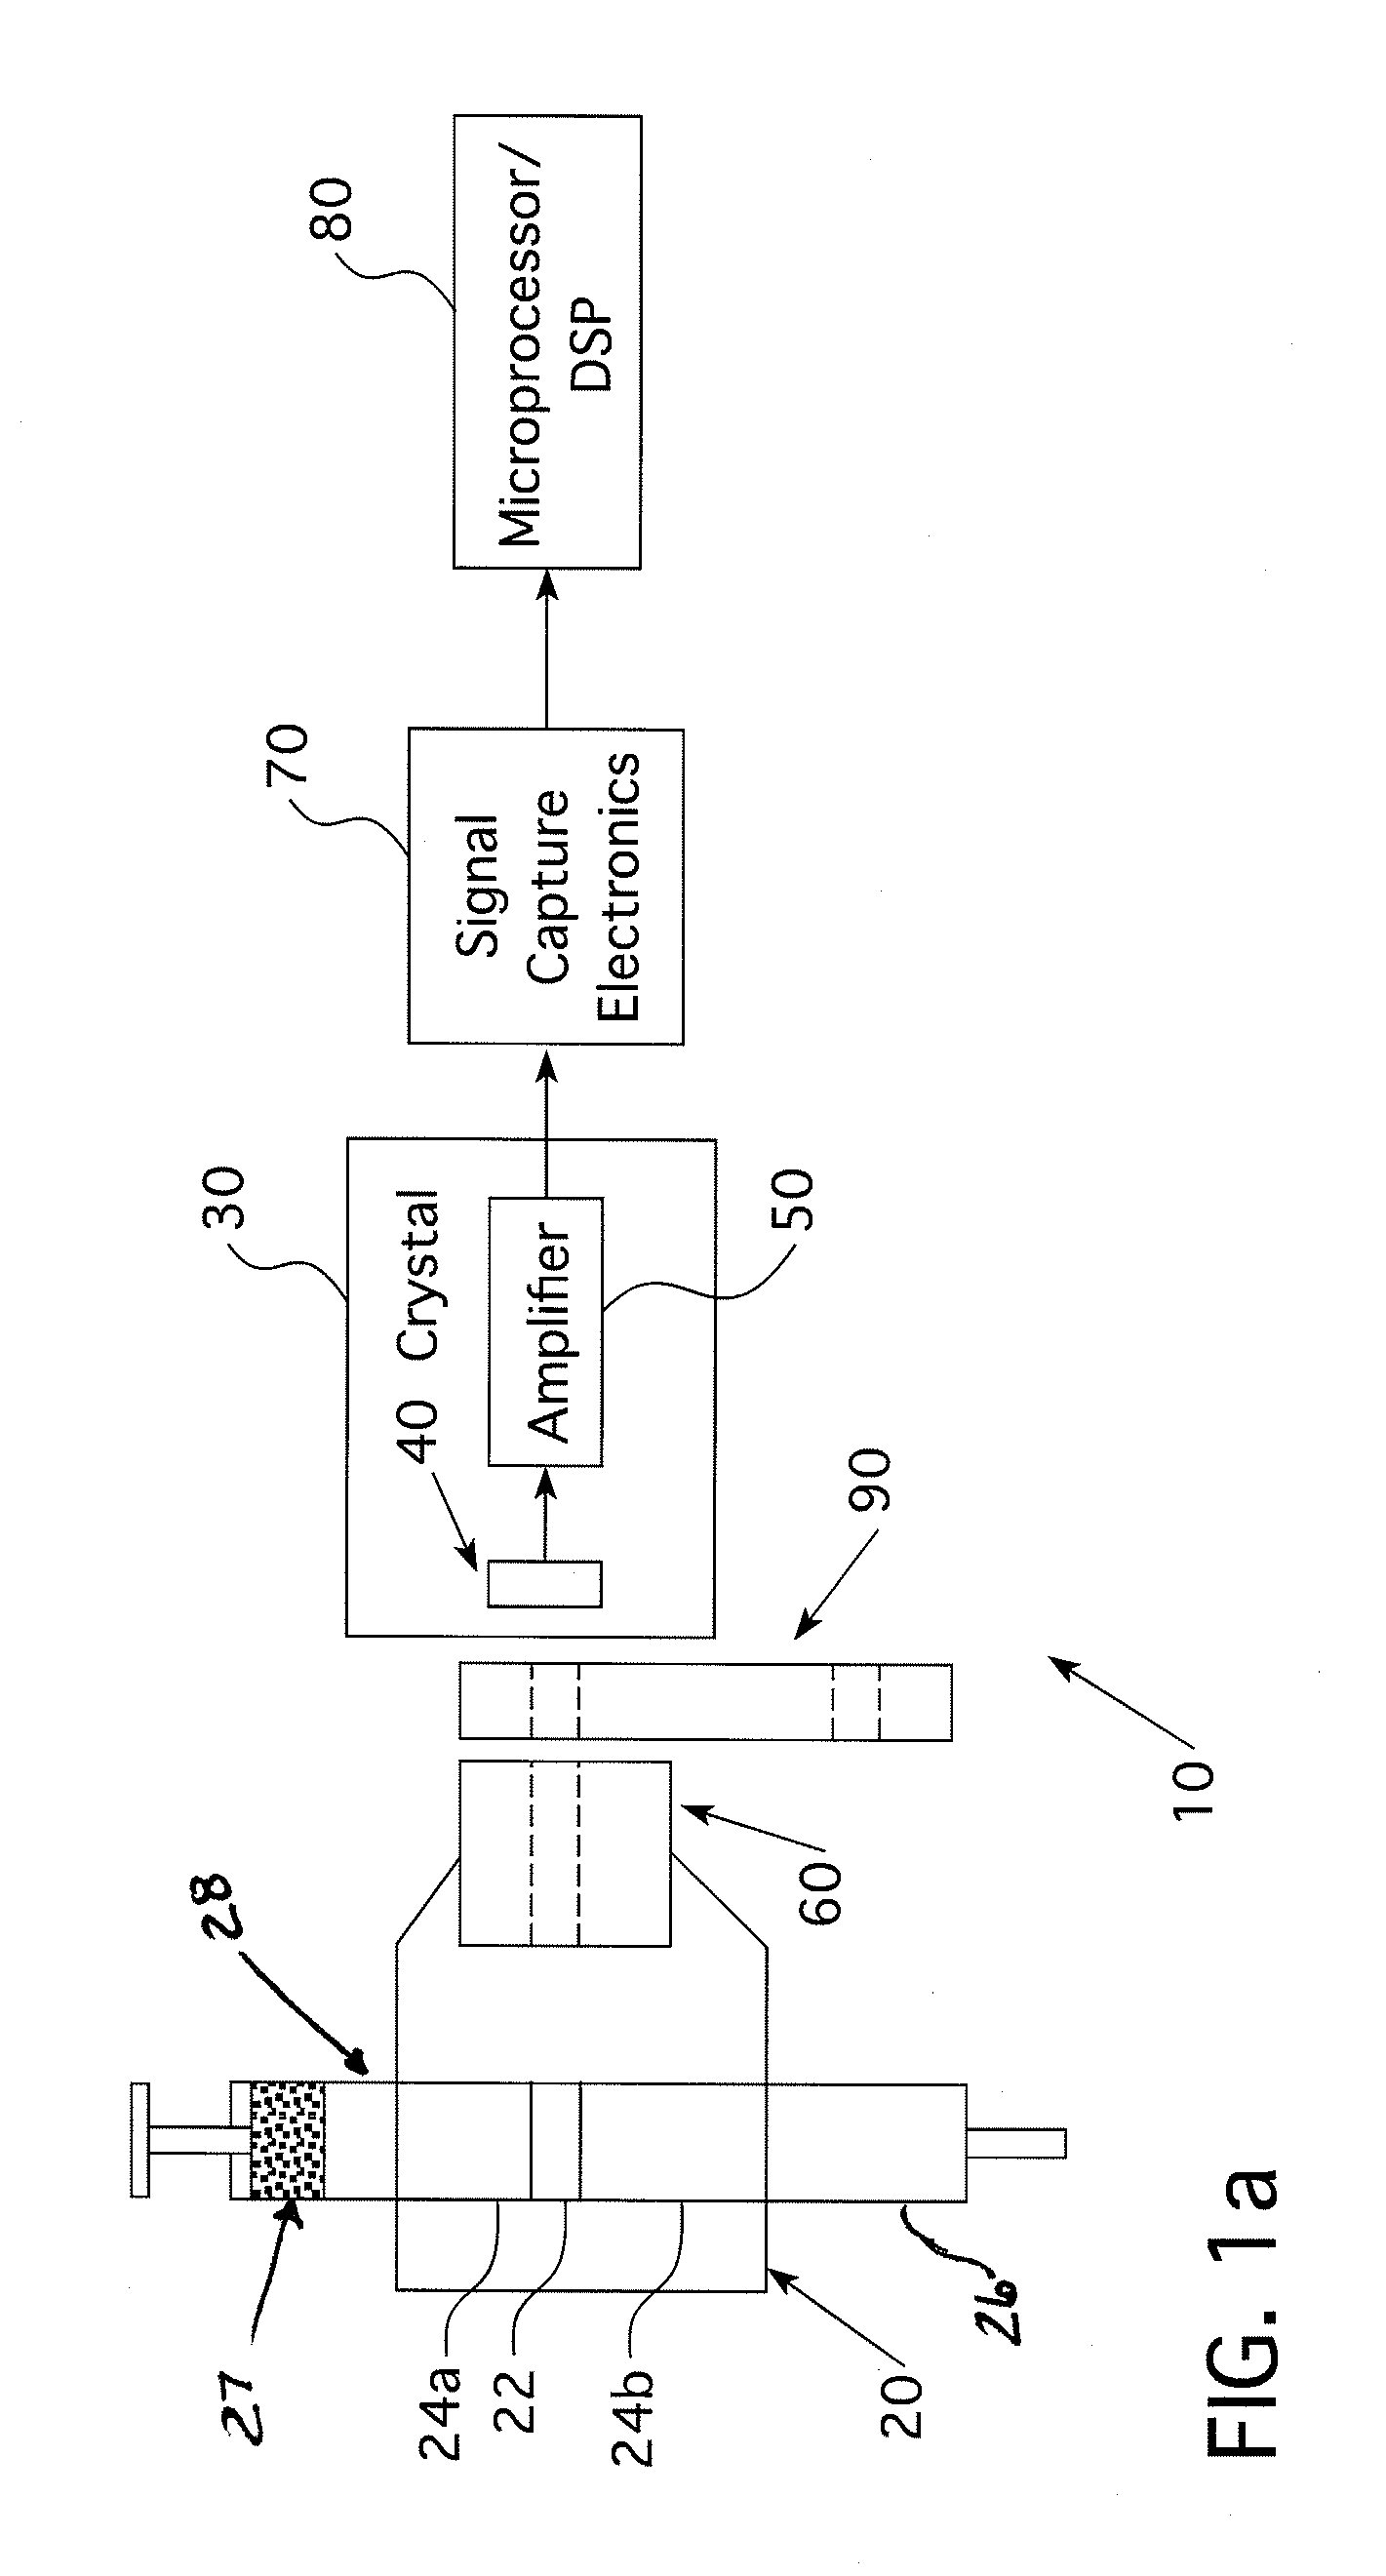 Radiopharmaceutical Concentration Measurement System and Method